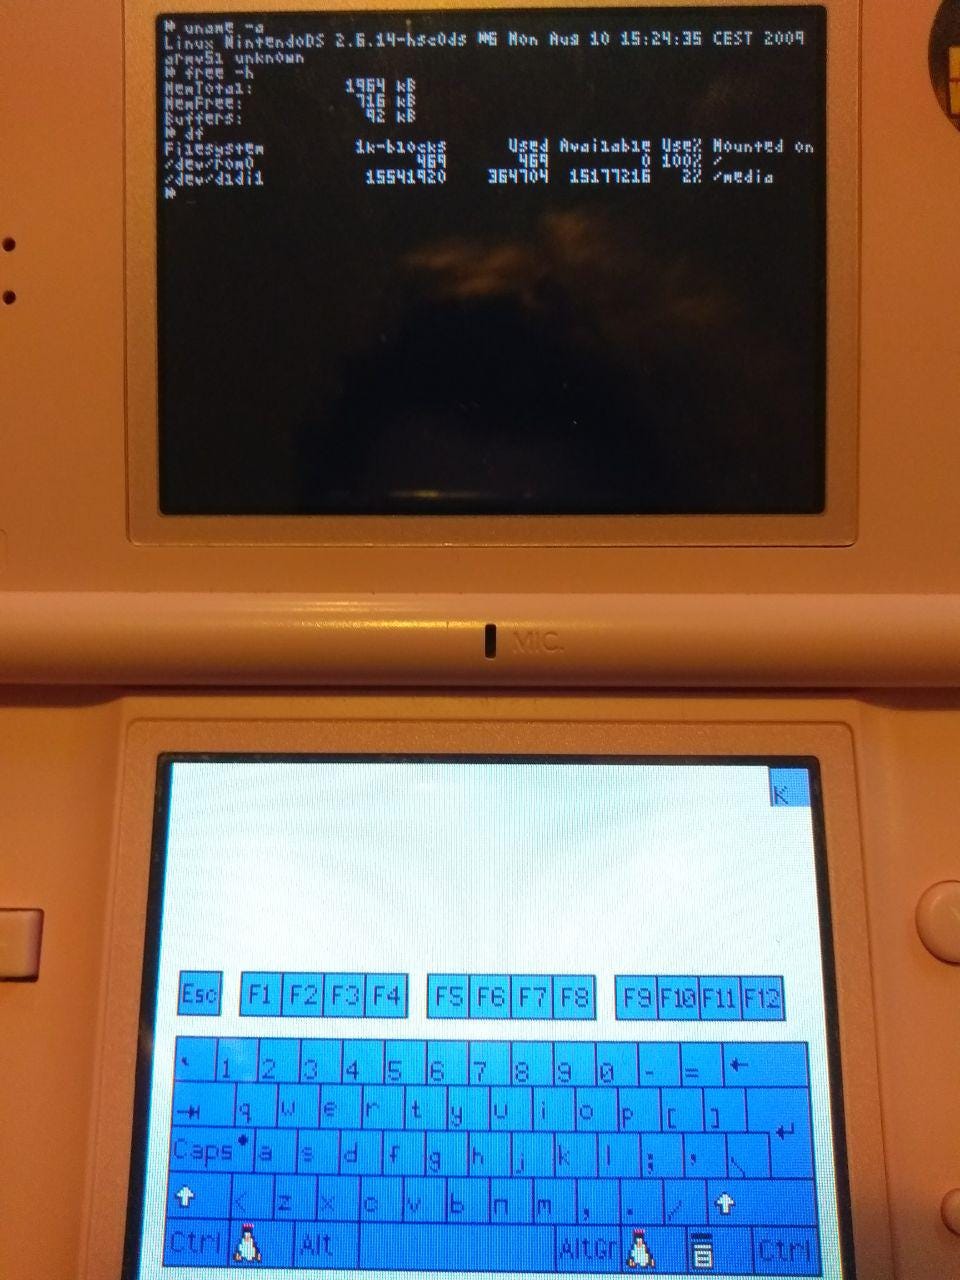 DSLinux on a DSLite with an M3DS Real card and SuperCard SD | by Samathy |  Medium